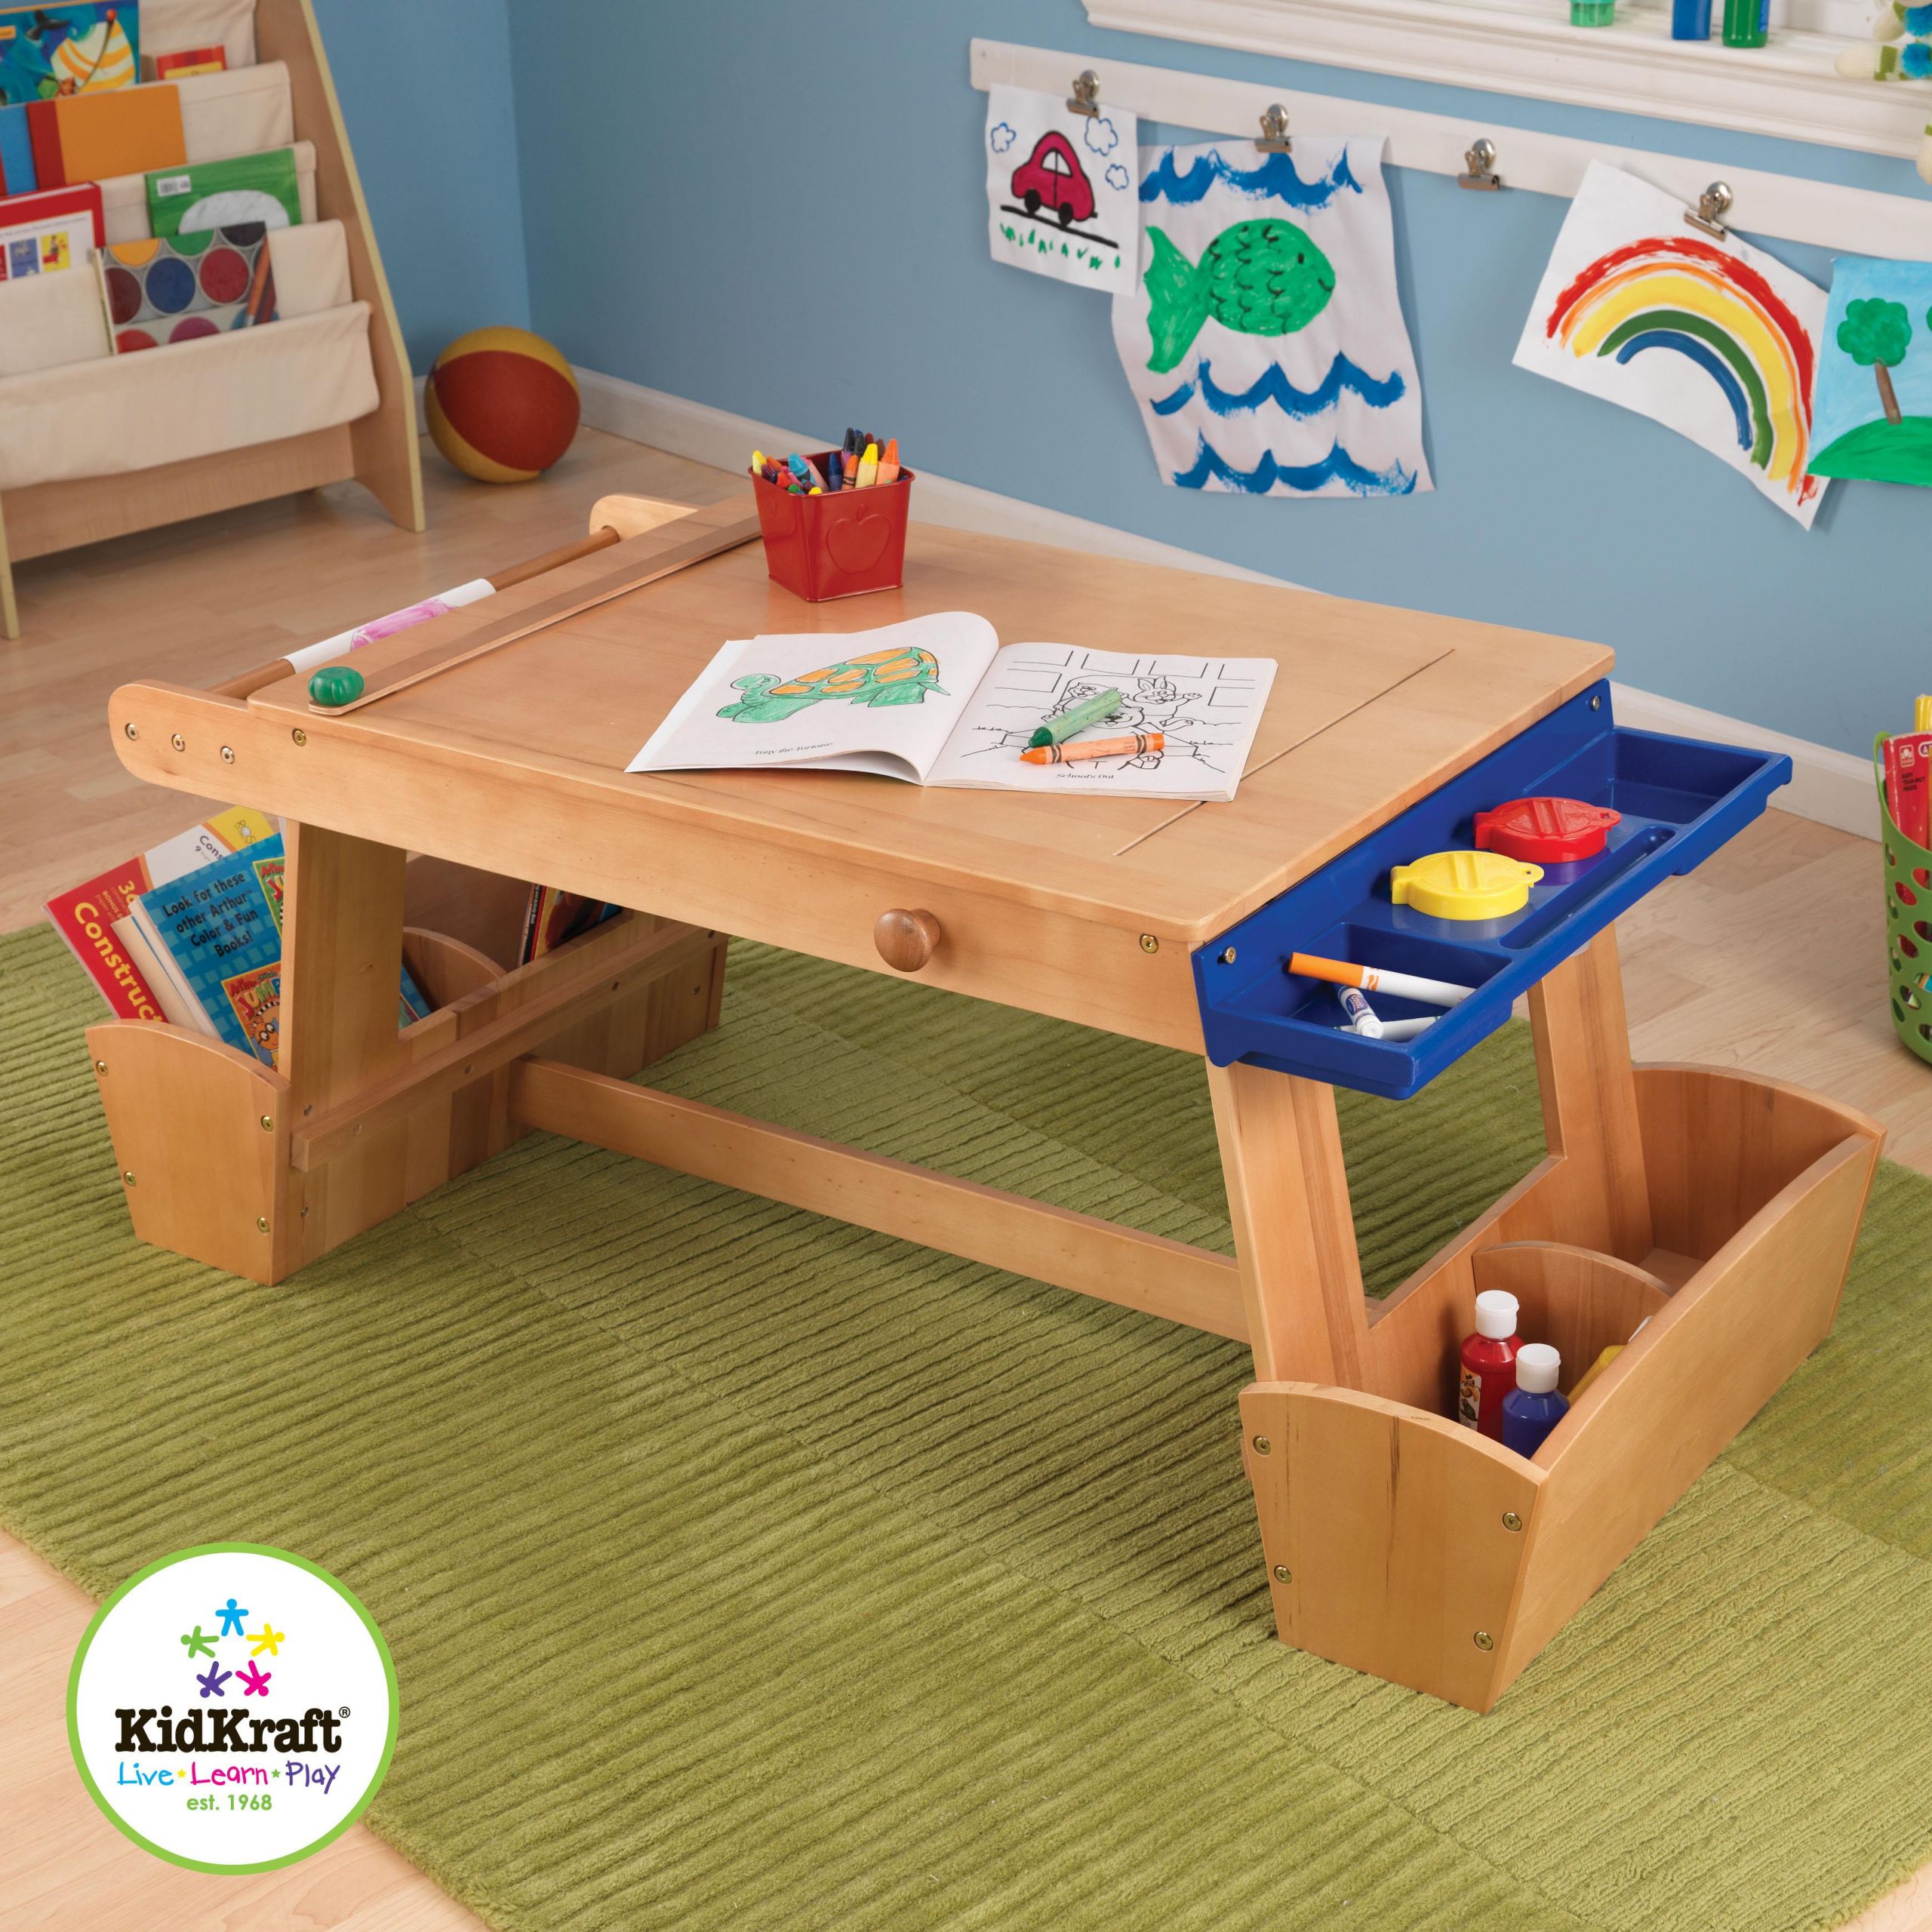 Kids Art And Craft Tables
 KidKraft Art Table with Drying Rack & Storage by OJ